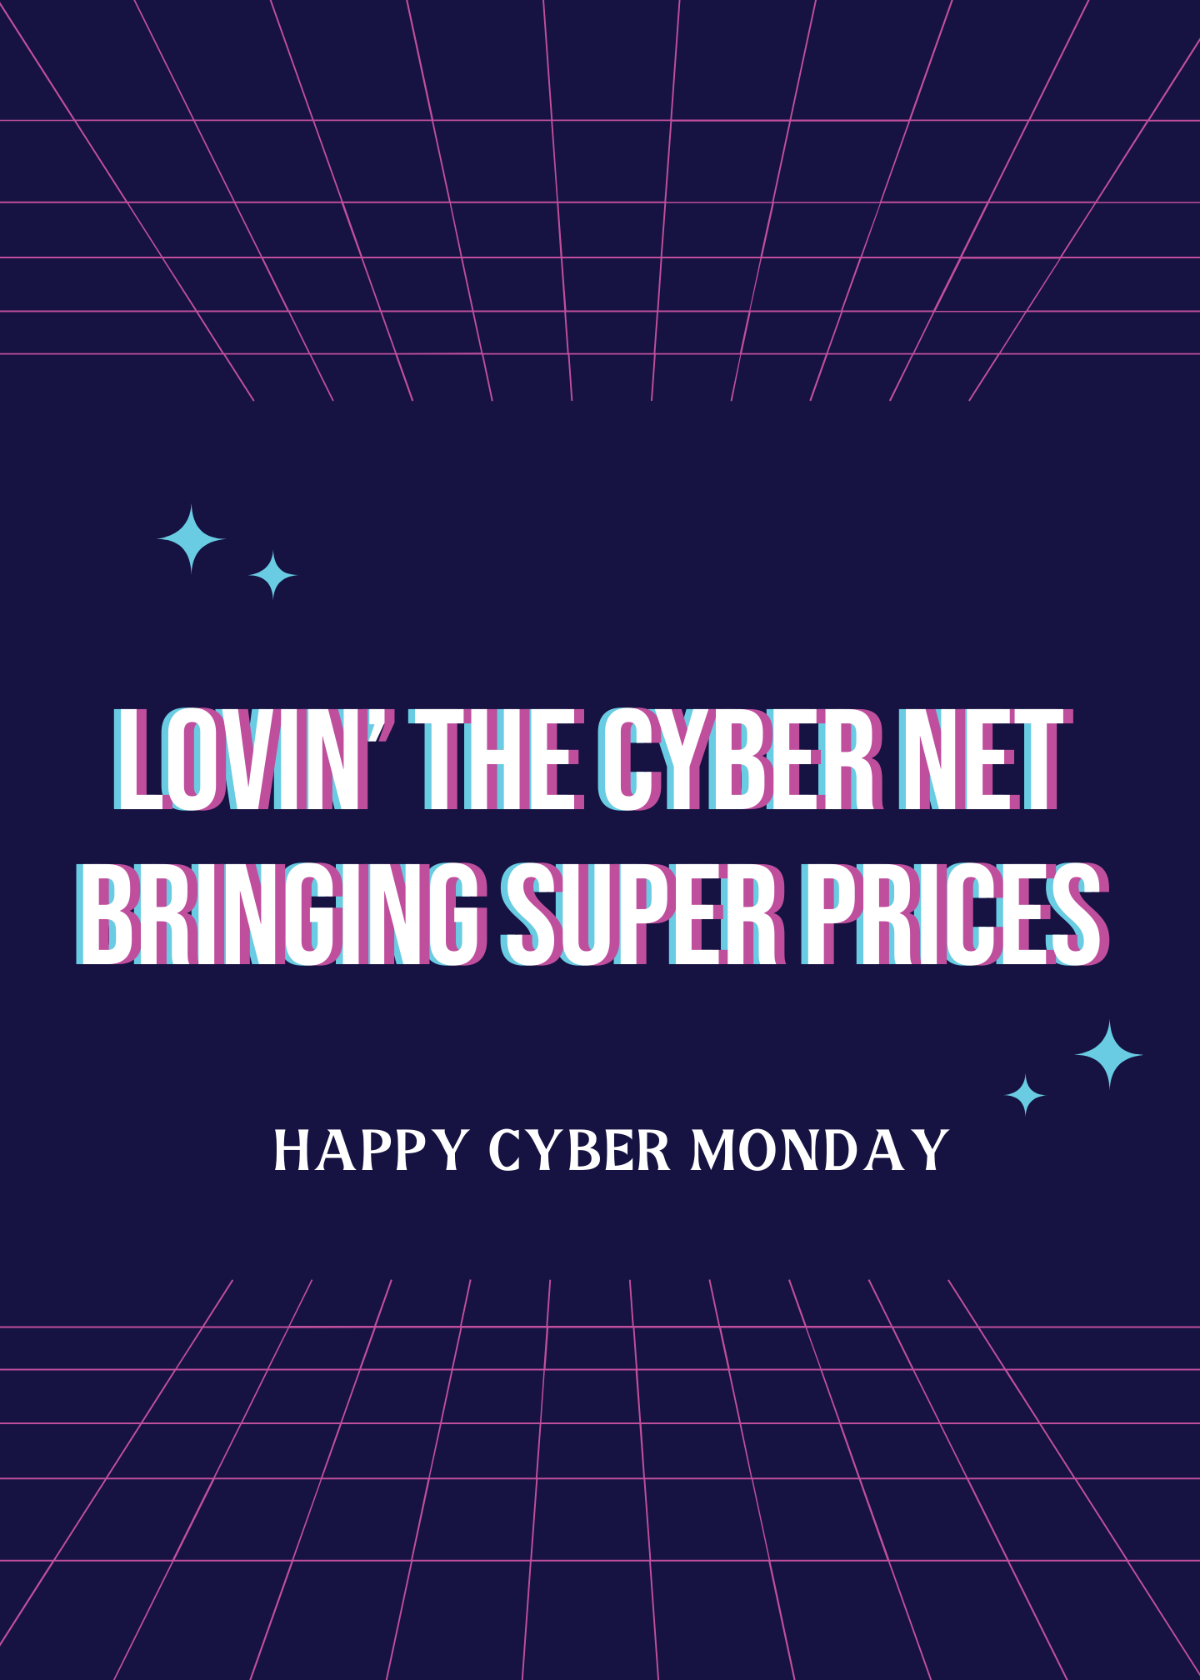 Cyber Monday Greeting Template